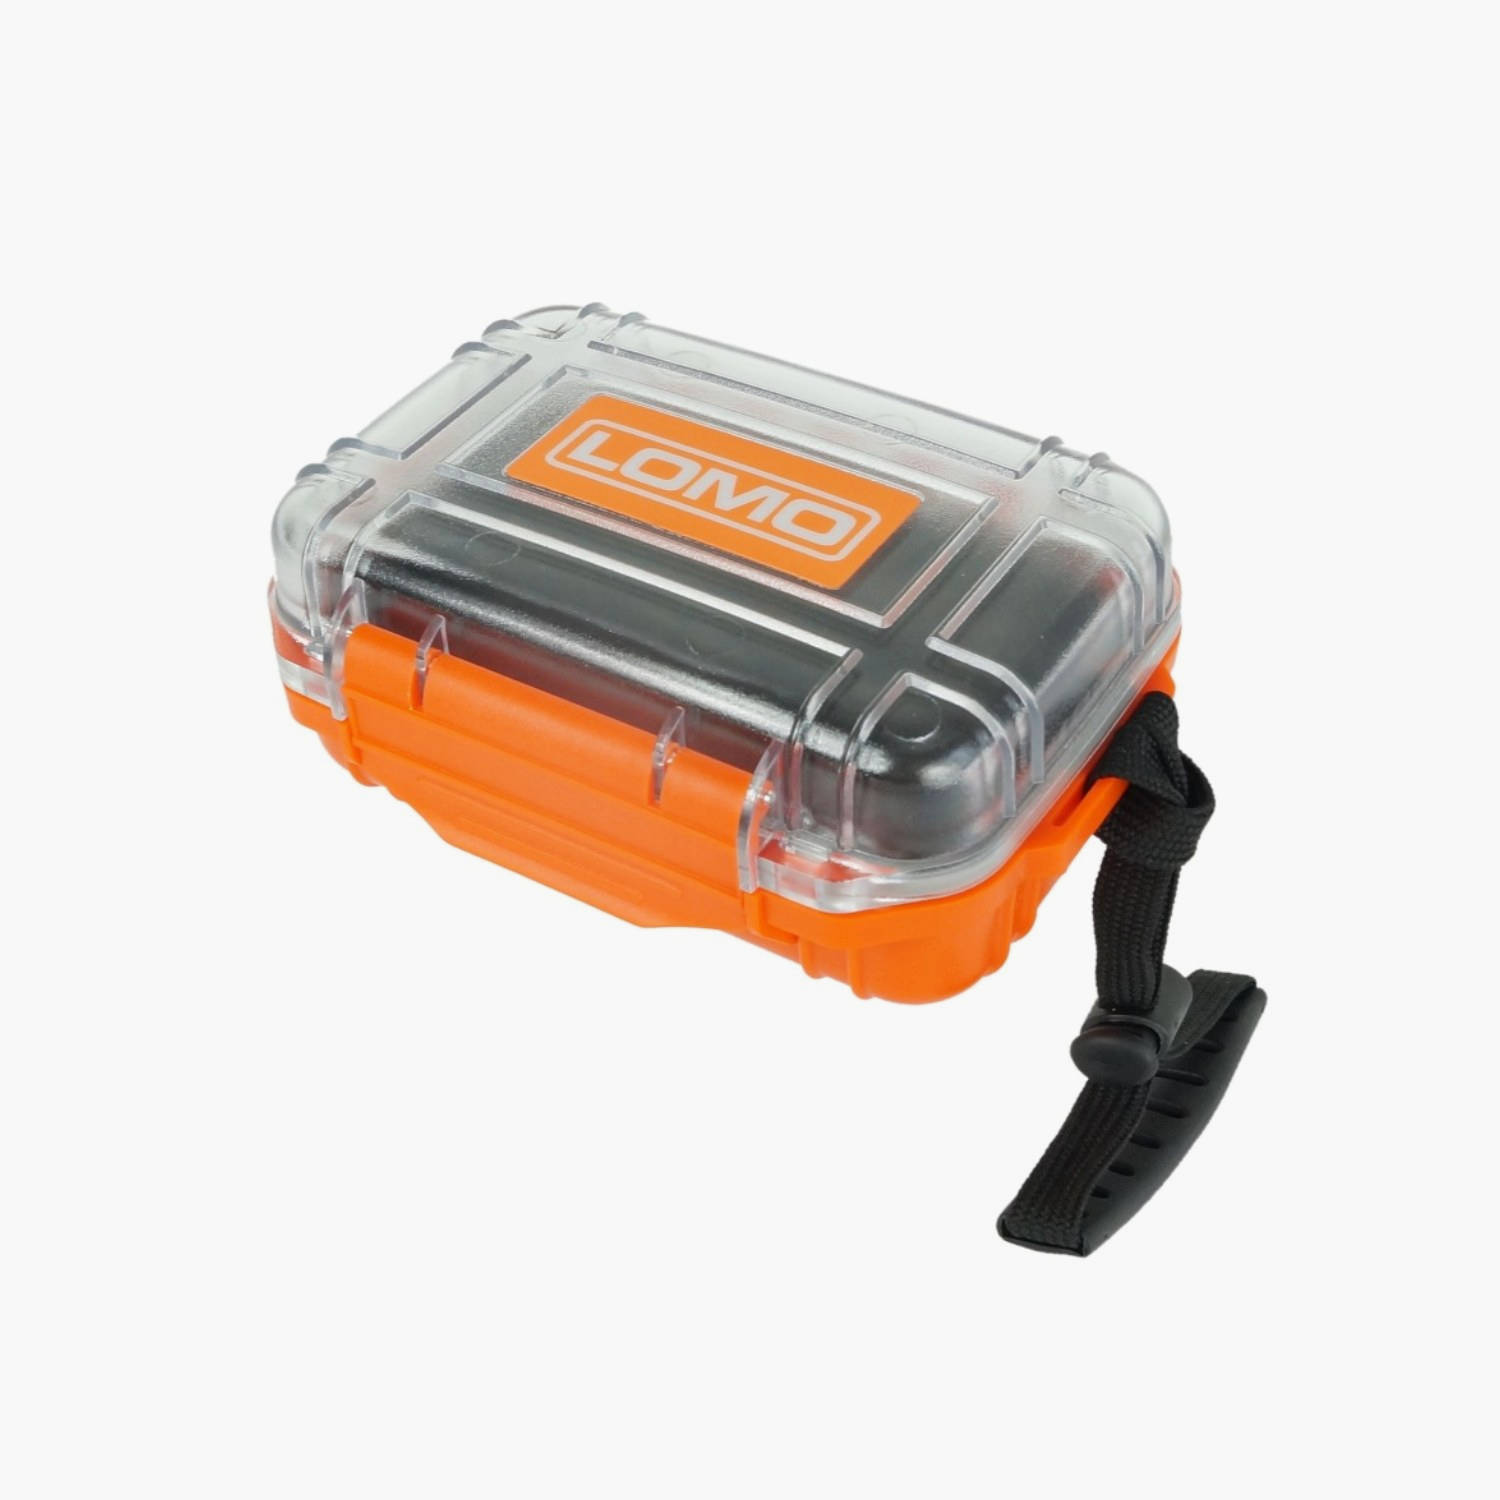 Drybox 17 - Mini Size Dry Box - Transparent Lid  Lomo Watersport UK.  Wetsuits, Dry Bags & Outdoor Gear.